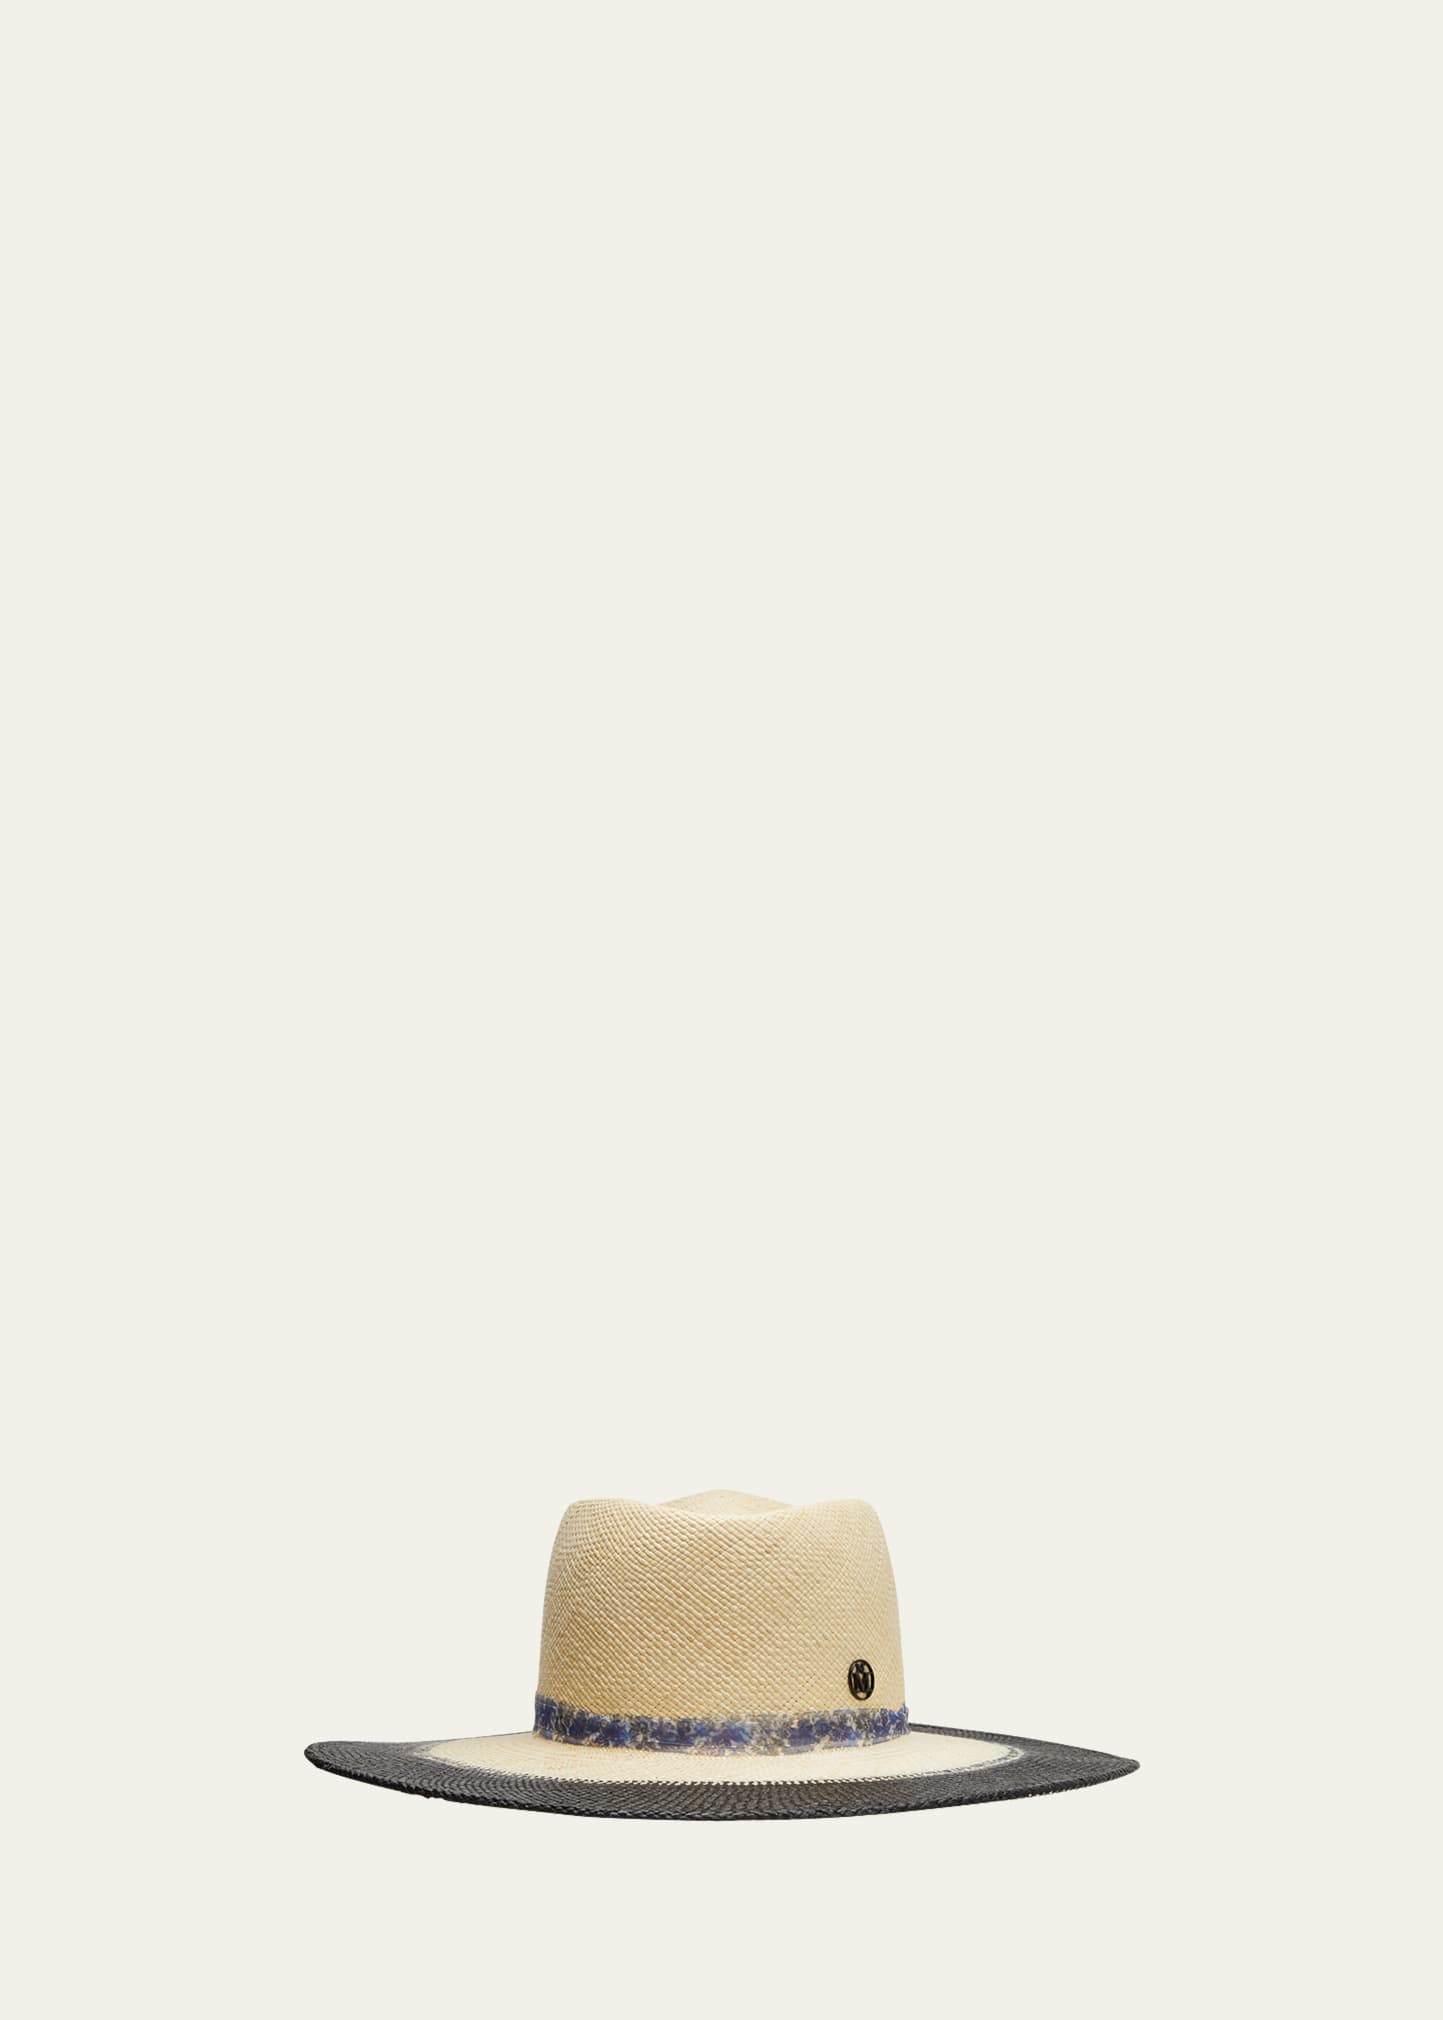 MAISON MICHEL BRUNE TWO-TONE STRAW FEDORA WITH FLORAL BAND